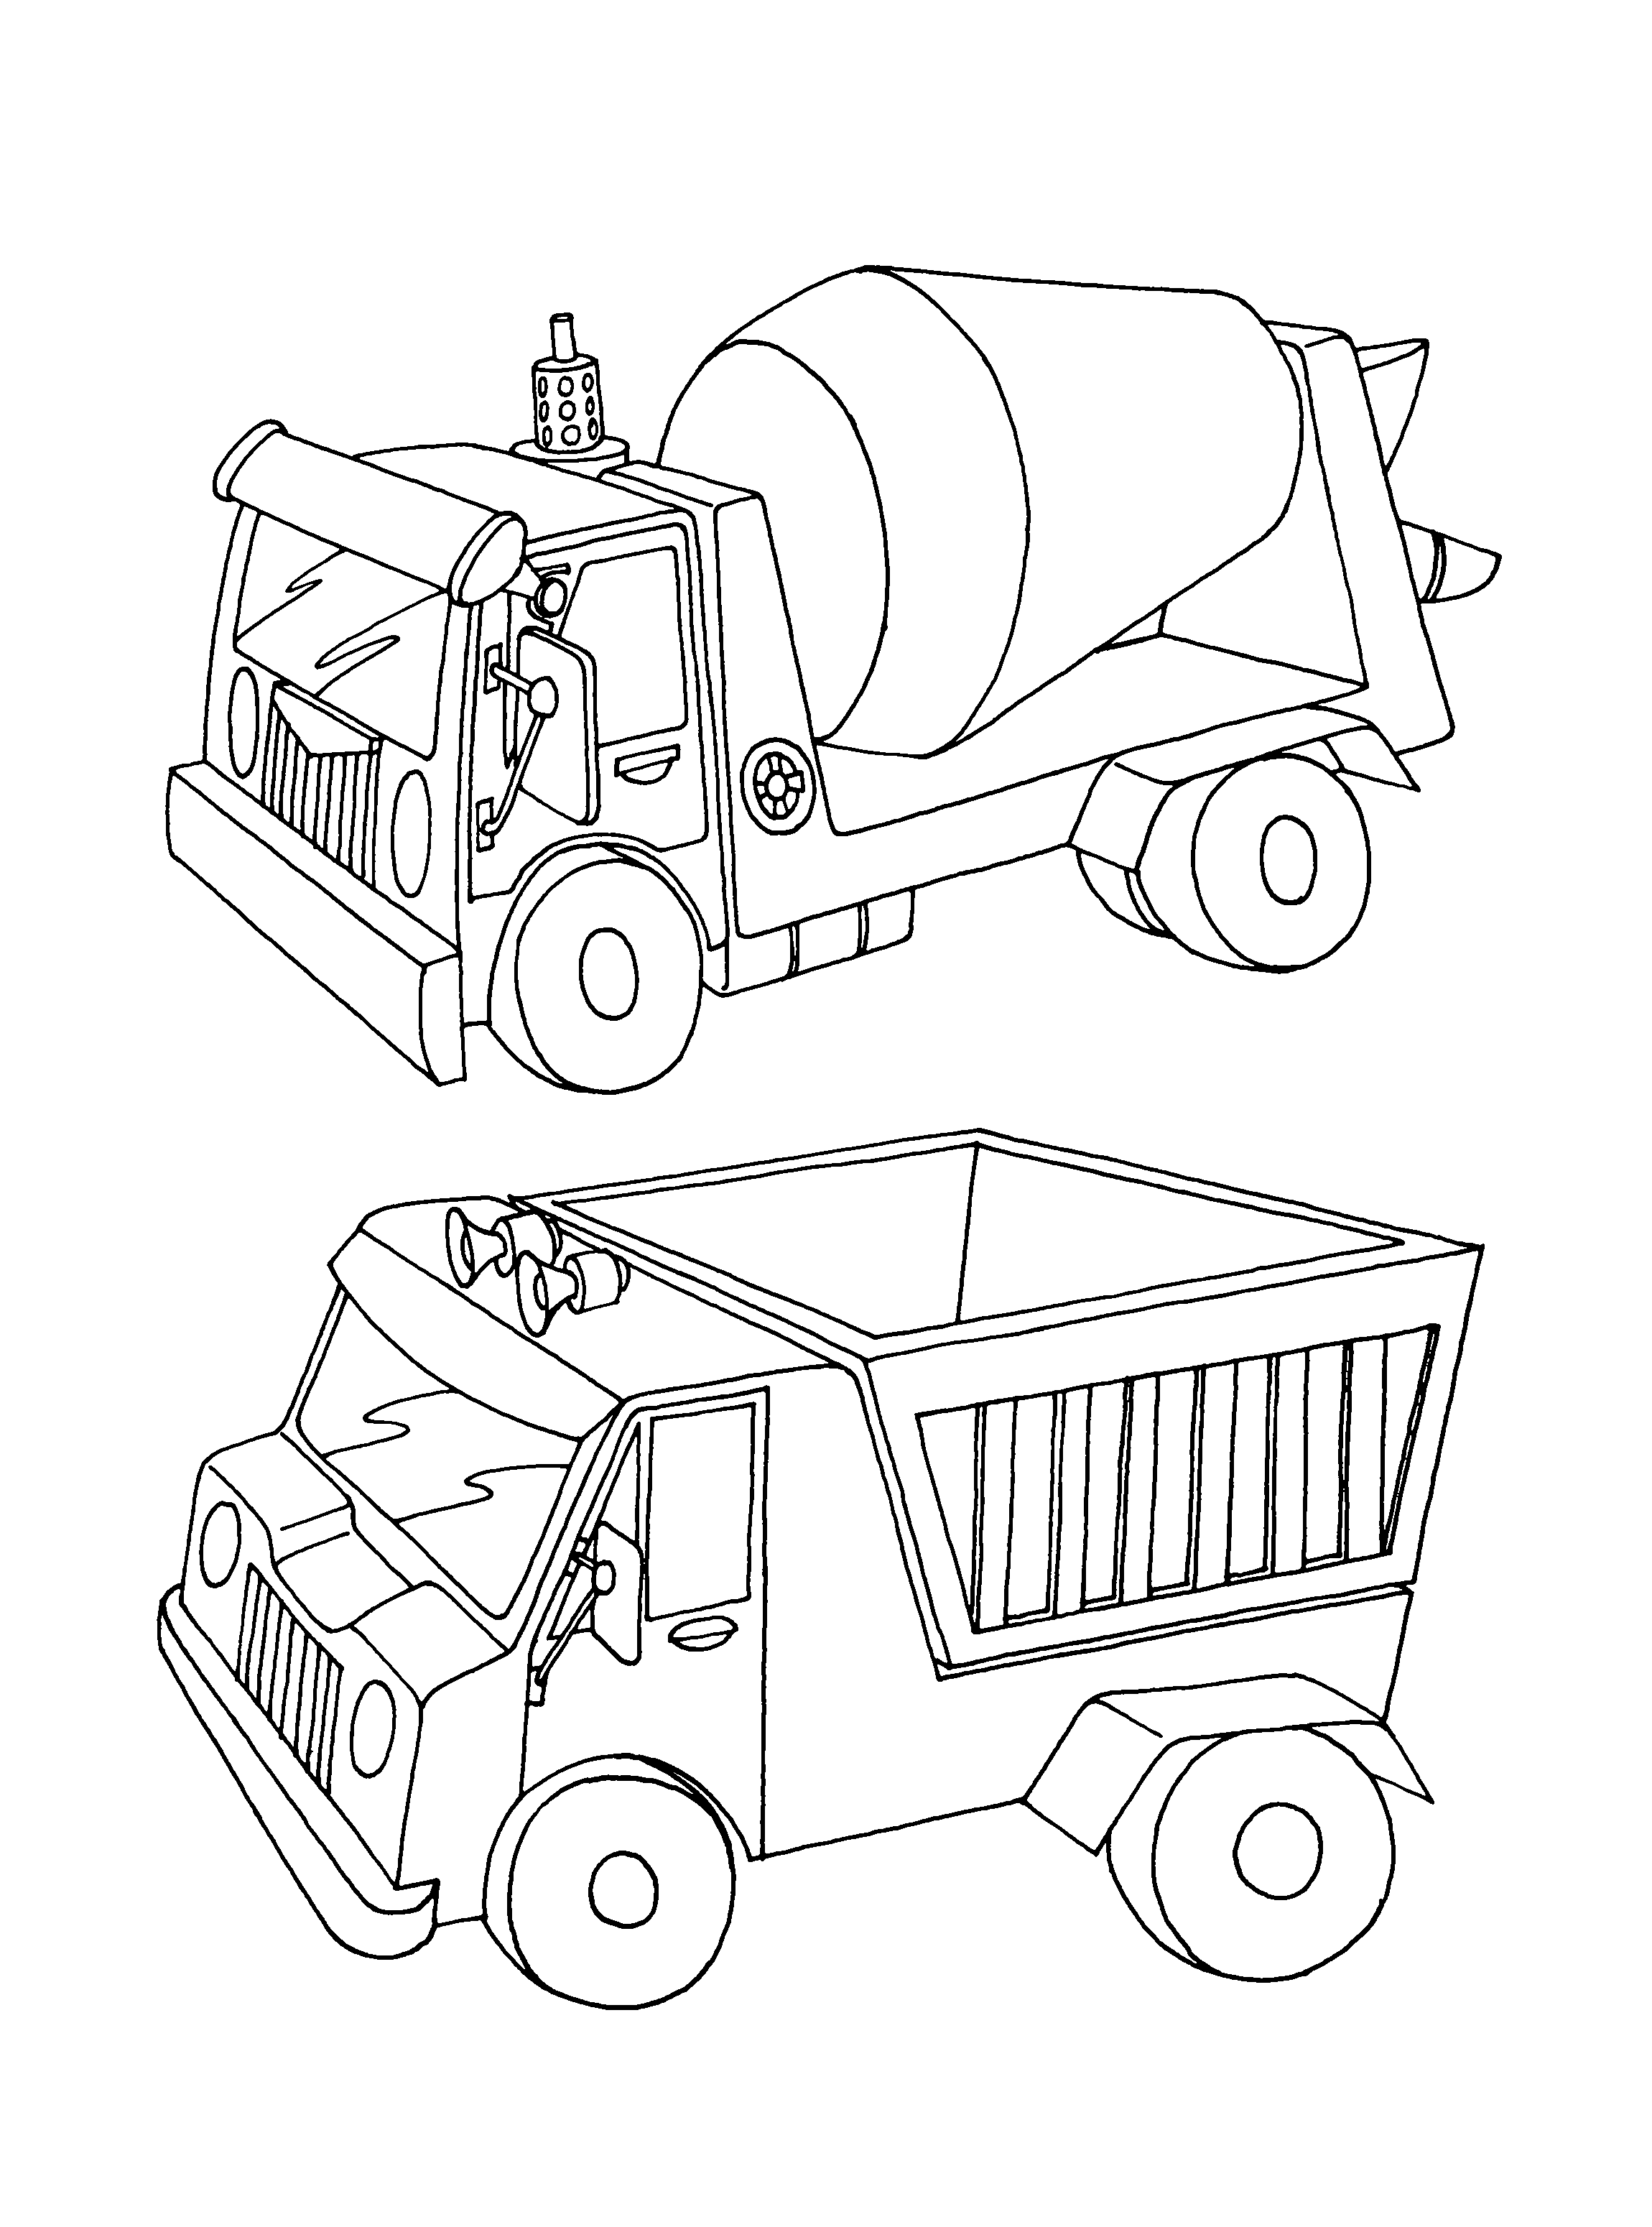 Spike and suzy coloring pages